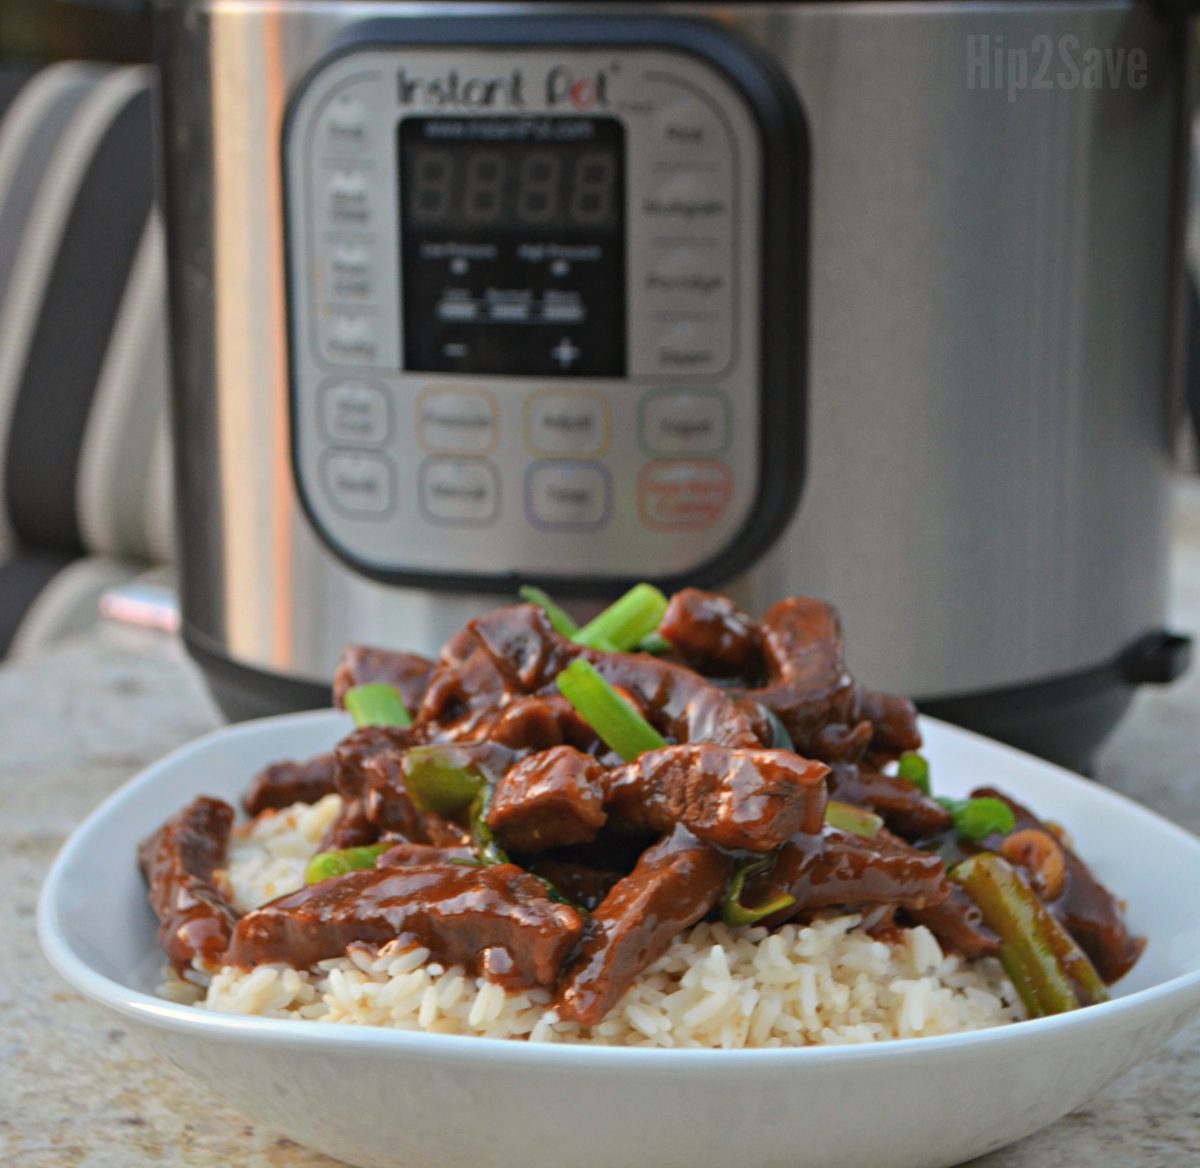 Mongolian beef served over rice in front of an instant pot